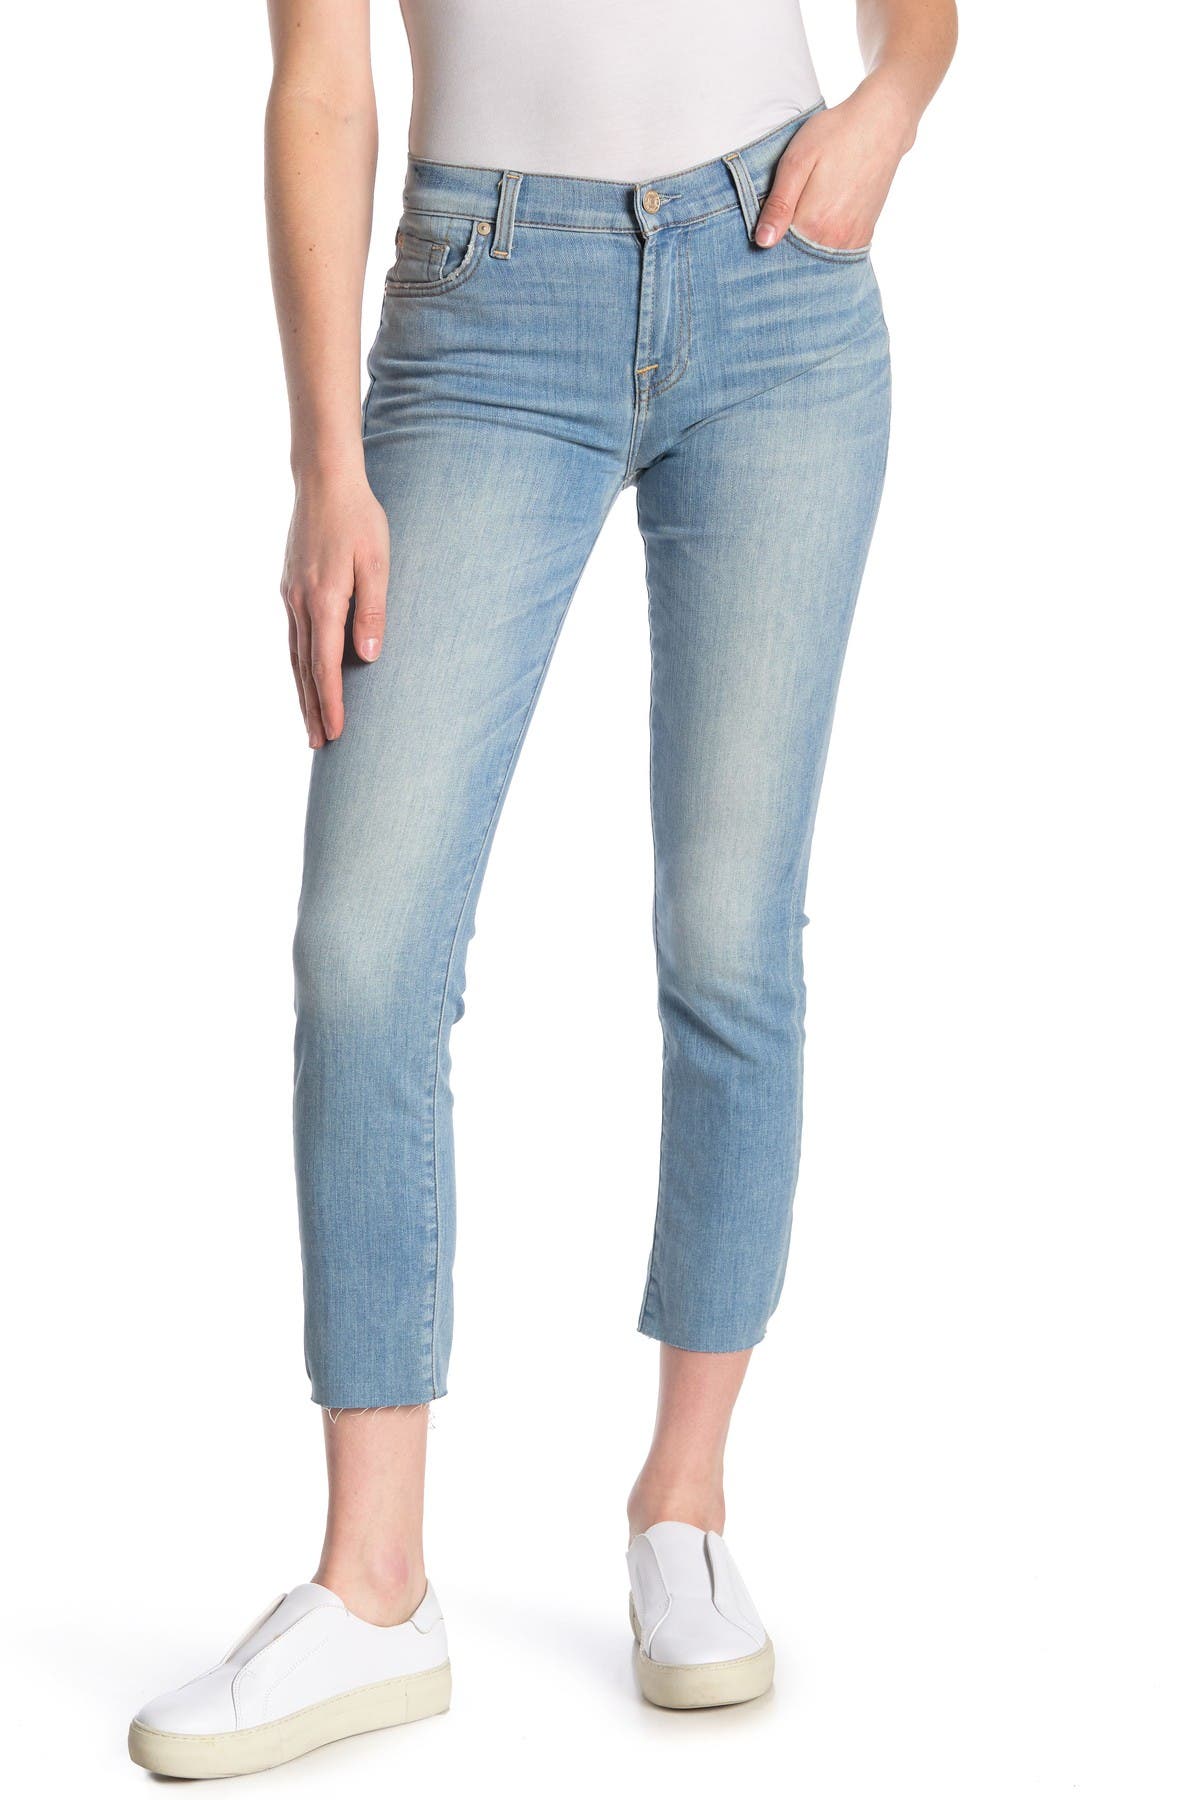 7 for all mankind roxanne classic skinny